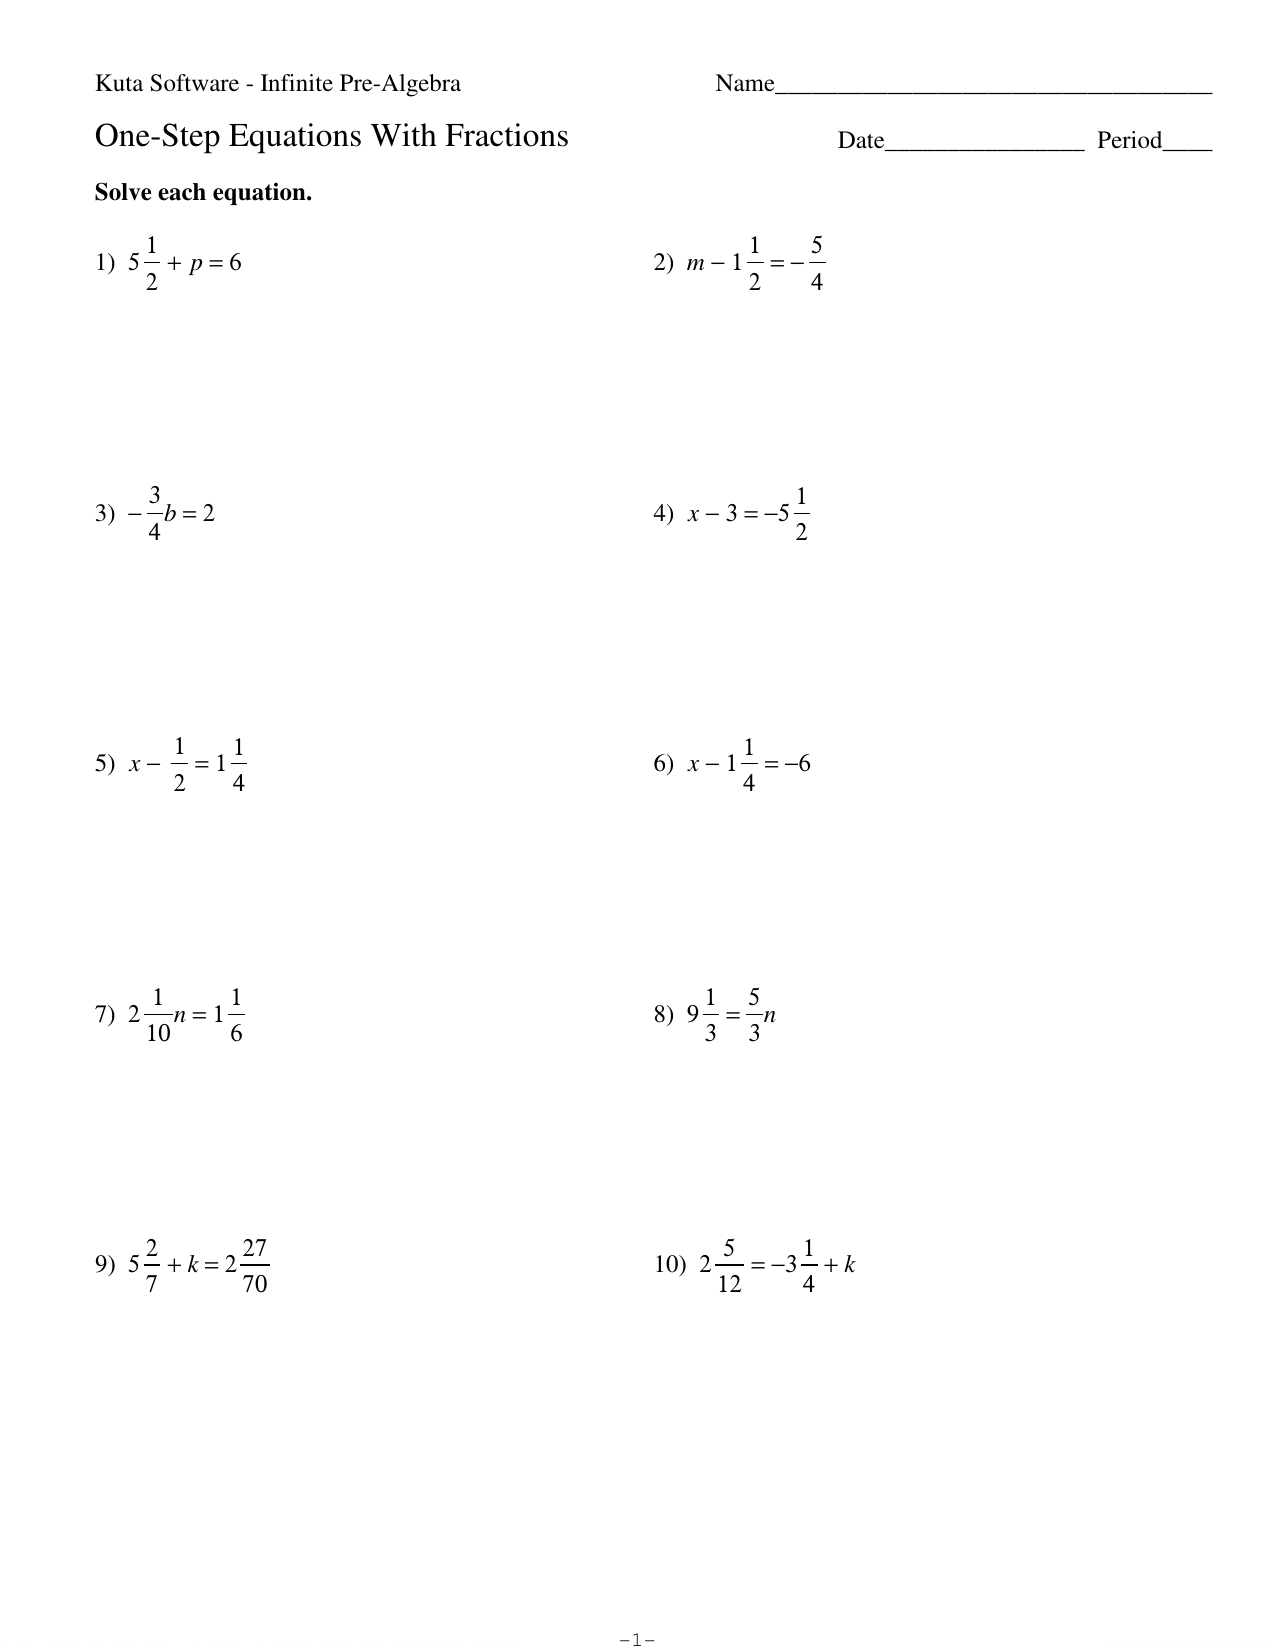 One-Step Equations With Fractions For 2 Step Equations Worksheet